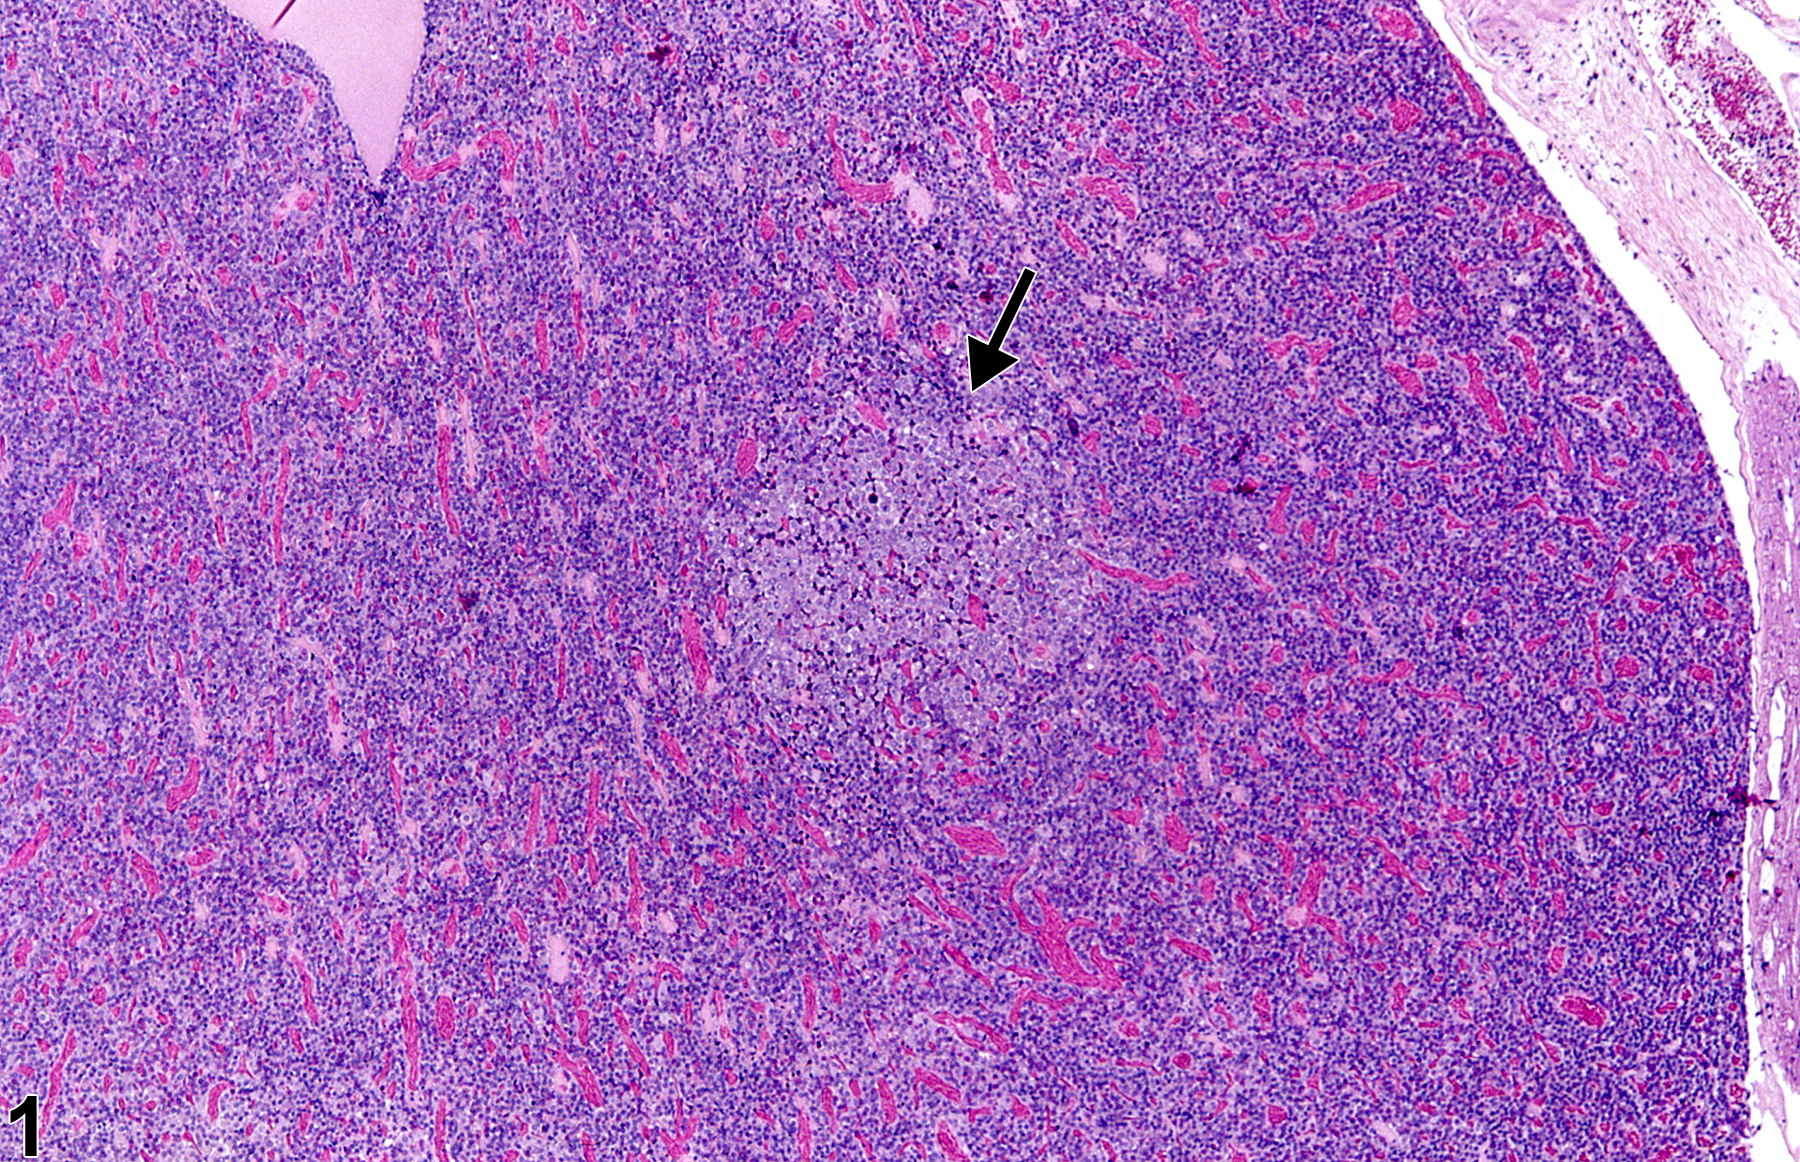 Image of hyperplasia in the pituitary gland from a female Harlan Sprague-Dawley rat in a chronic study